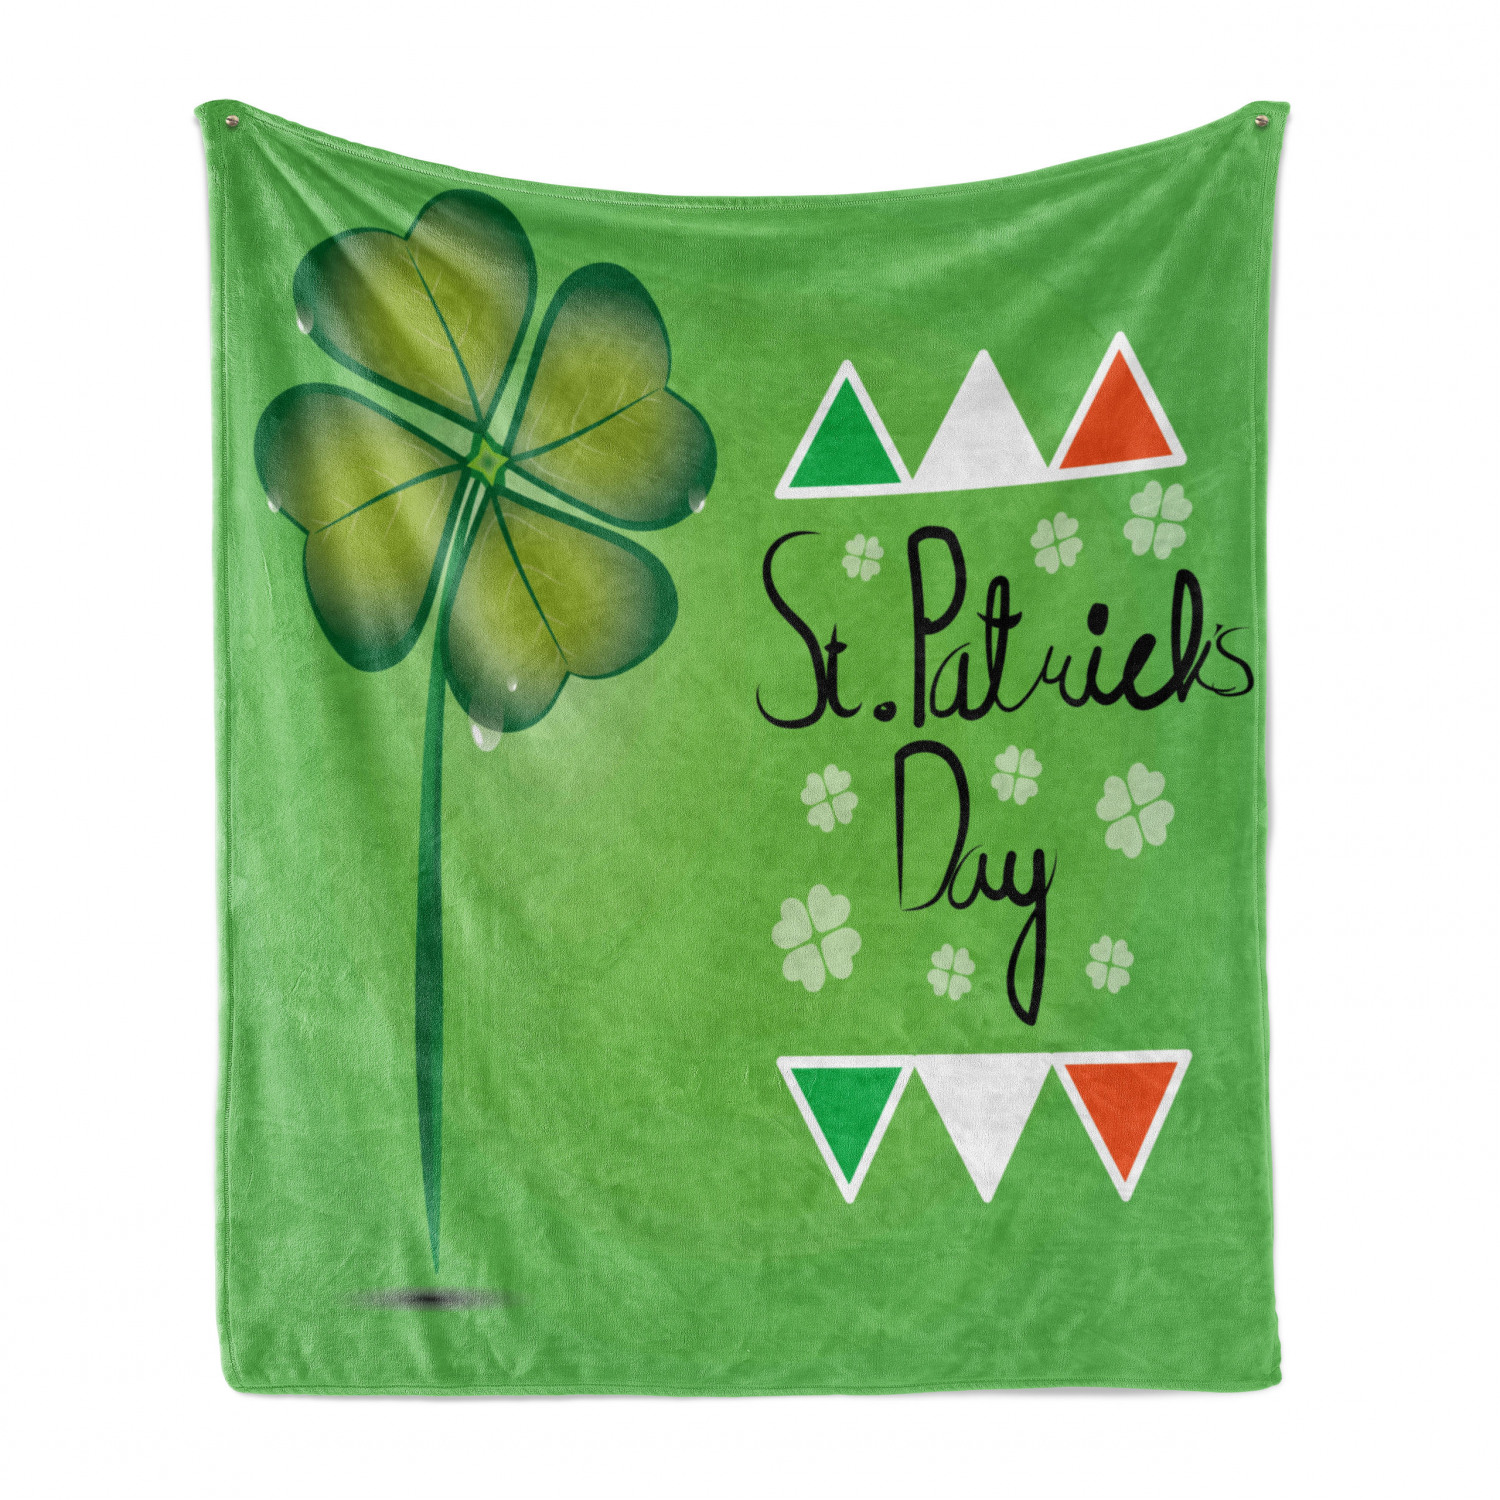 St. Patrick's Day Soft Flannel Fleece Throw Blanket, March 17th Celebration Large Shamrock Clover Leaf Flags Art, Cozy Plush for Indoor and Outdoor Use, 50" x 70", Olive and Fern Green, by Ambesonne - image 1 of 6